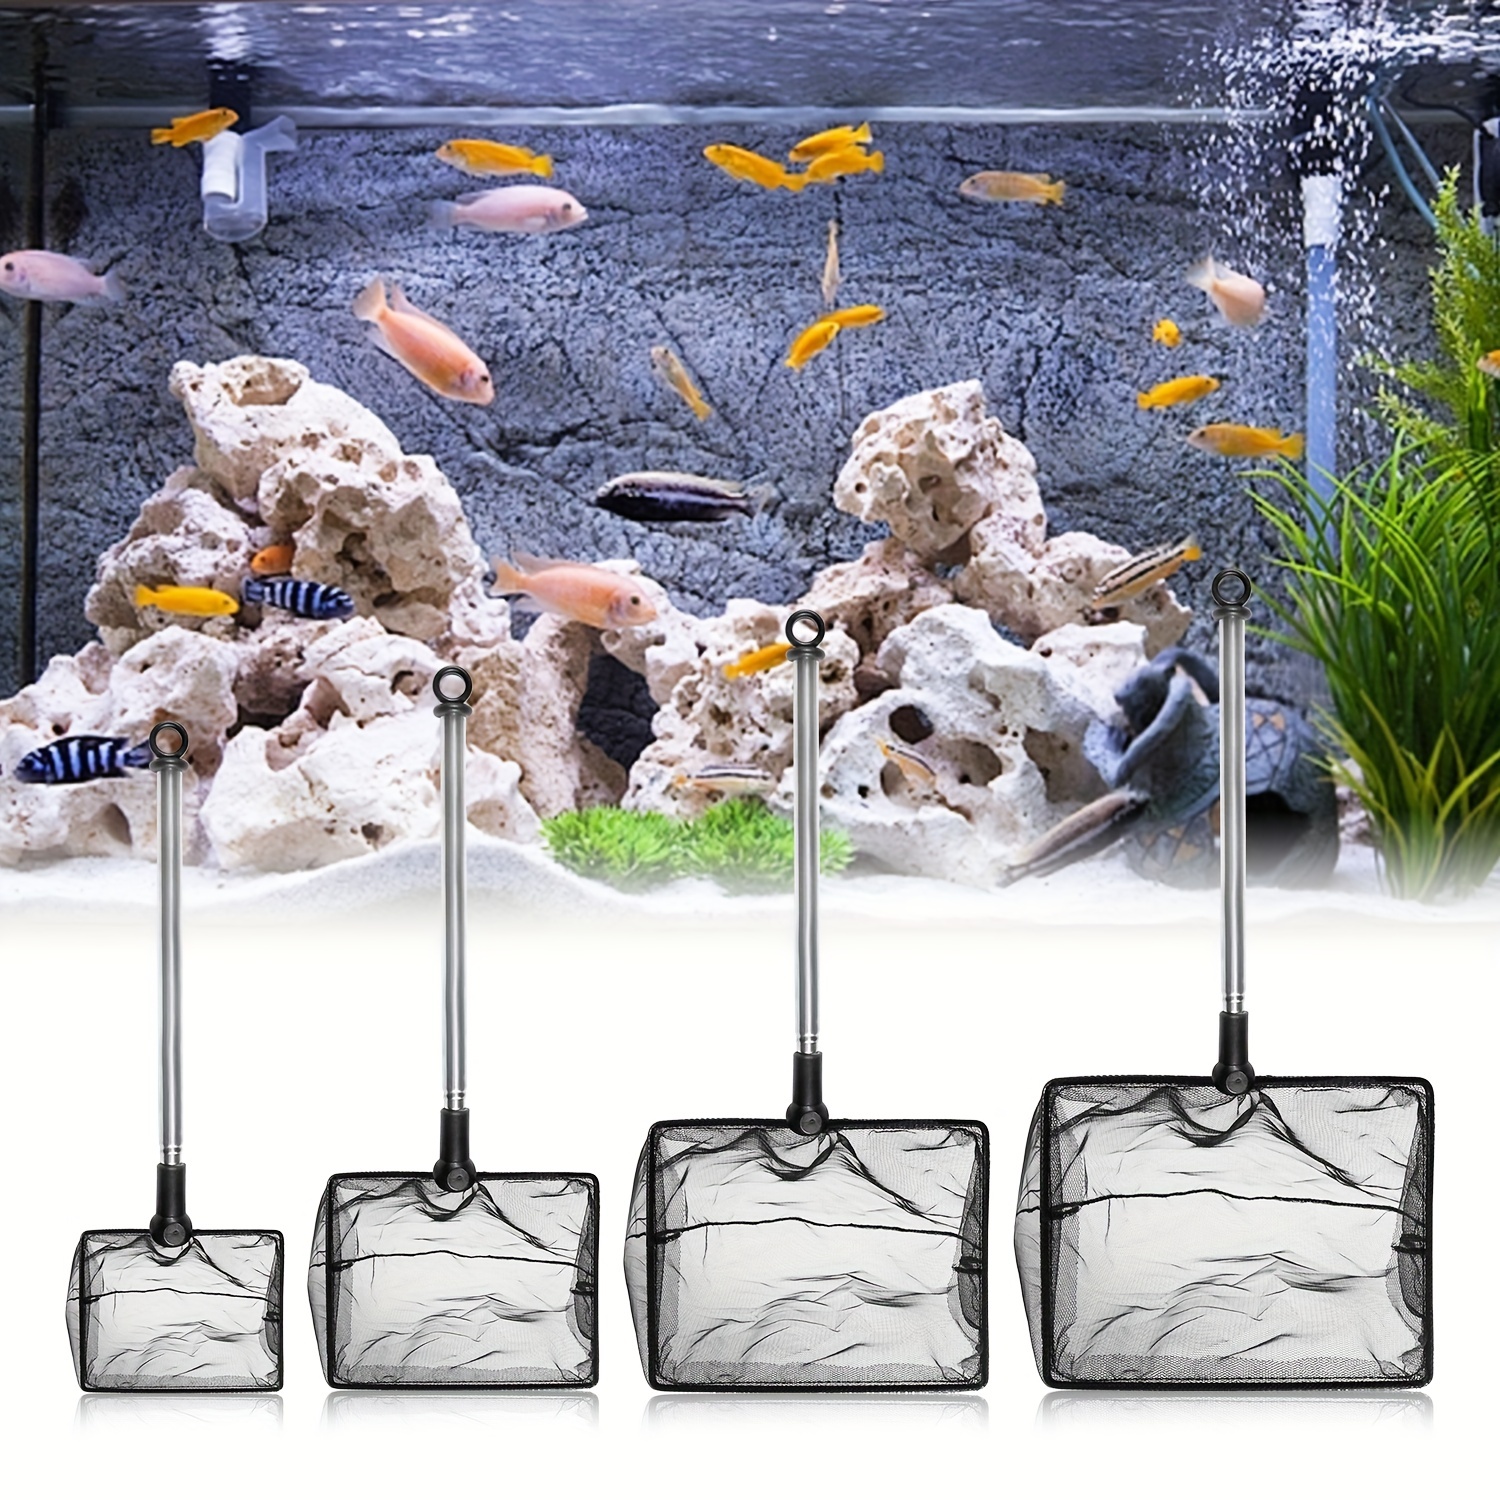 Fish Net with Stainless Steel Handle, 10 Inch - Koi Fish Safe Pond